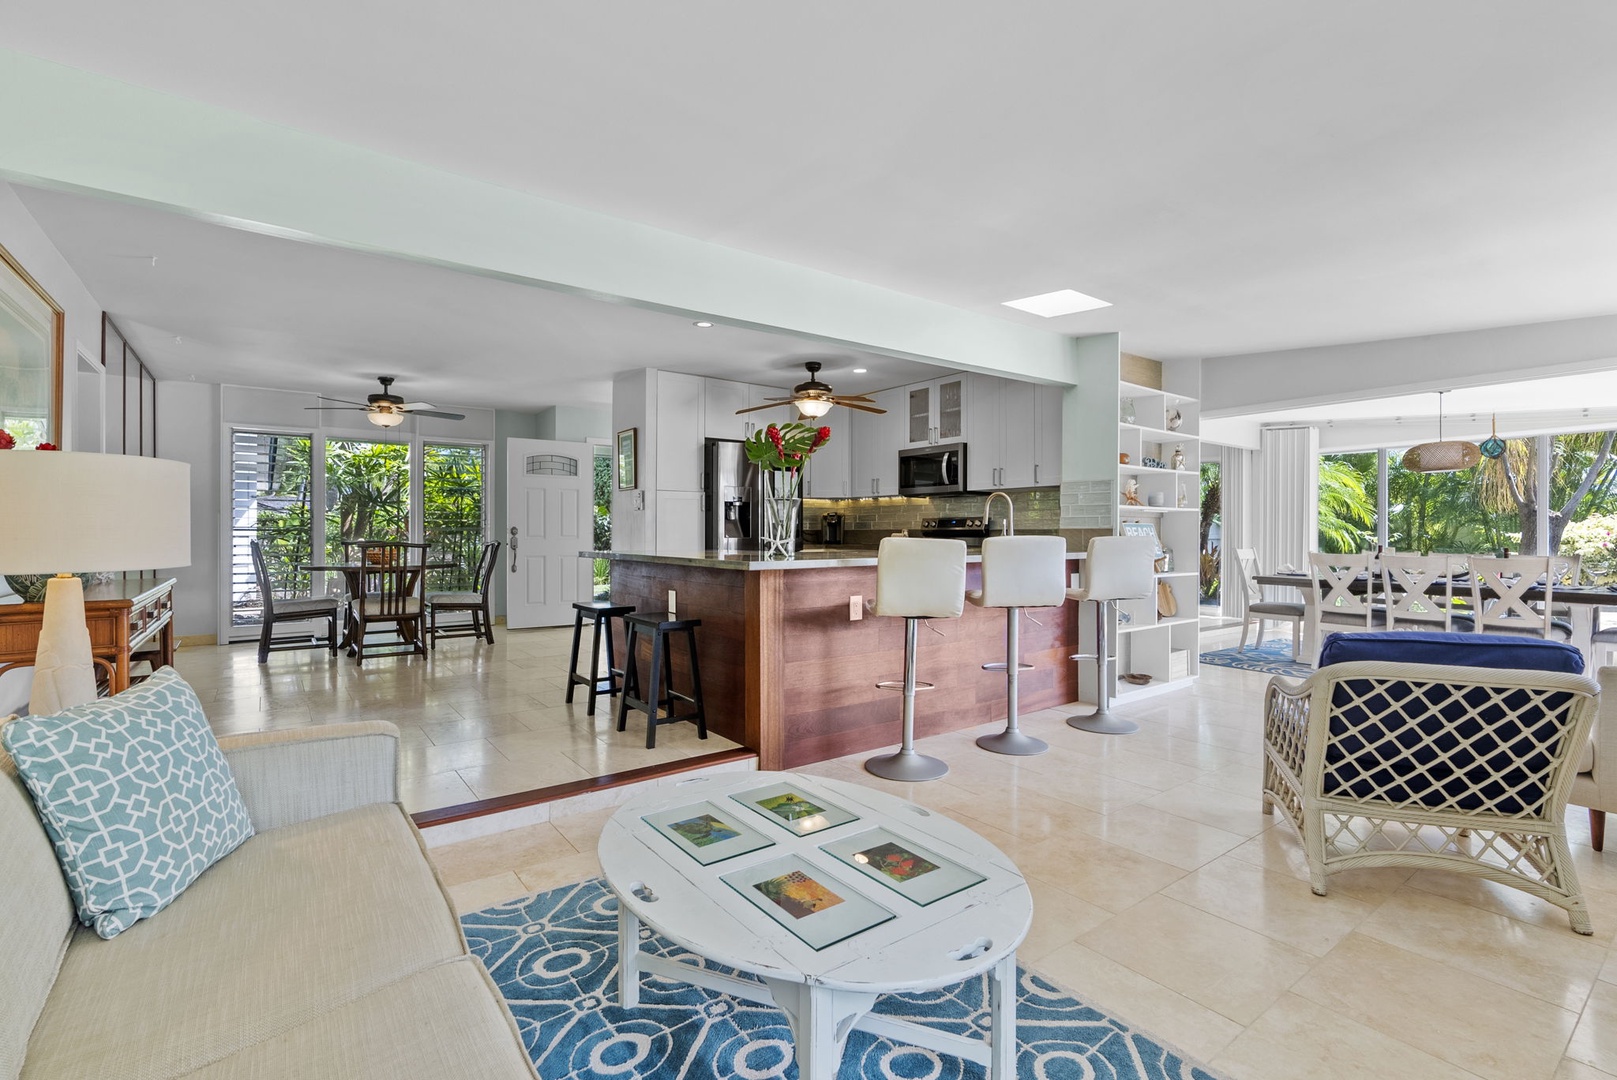 Kailua Vacation Rentals, Hale Aloha - Flow seamlessly from one space to the next with this open floorplan